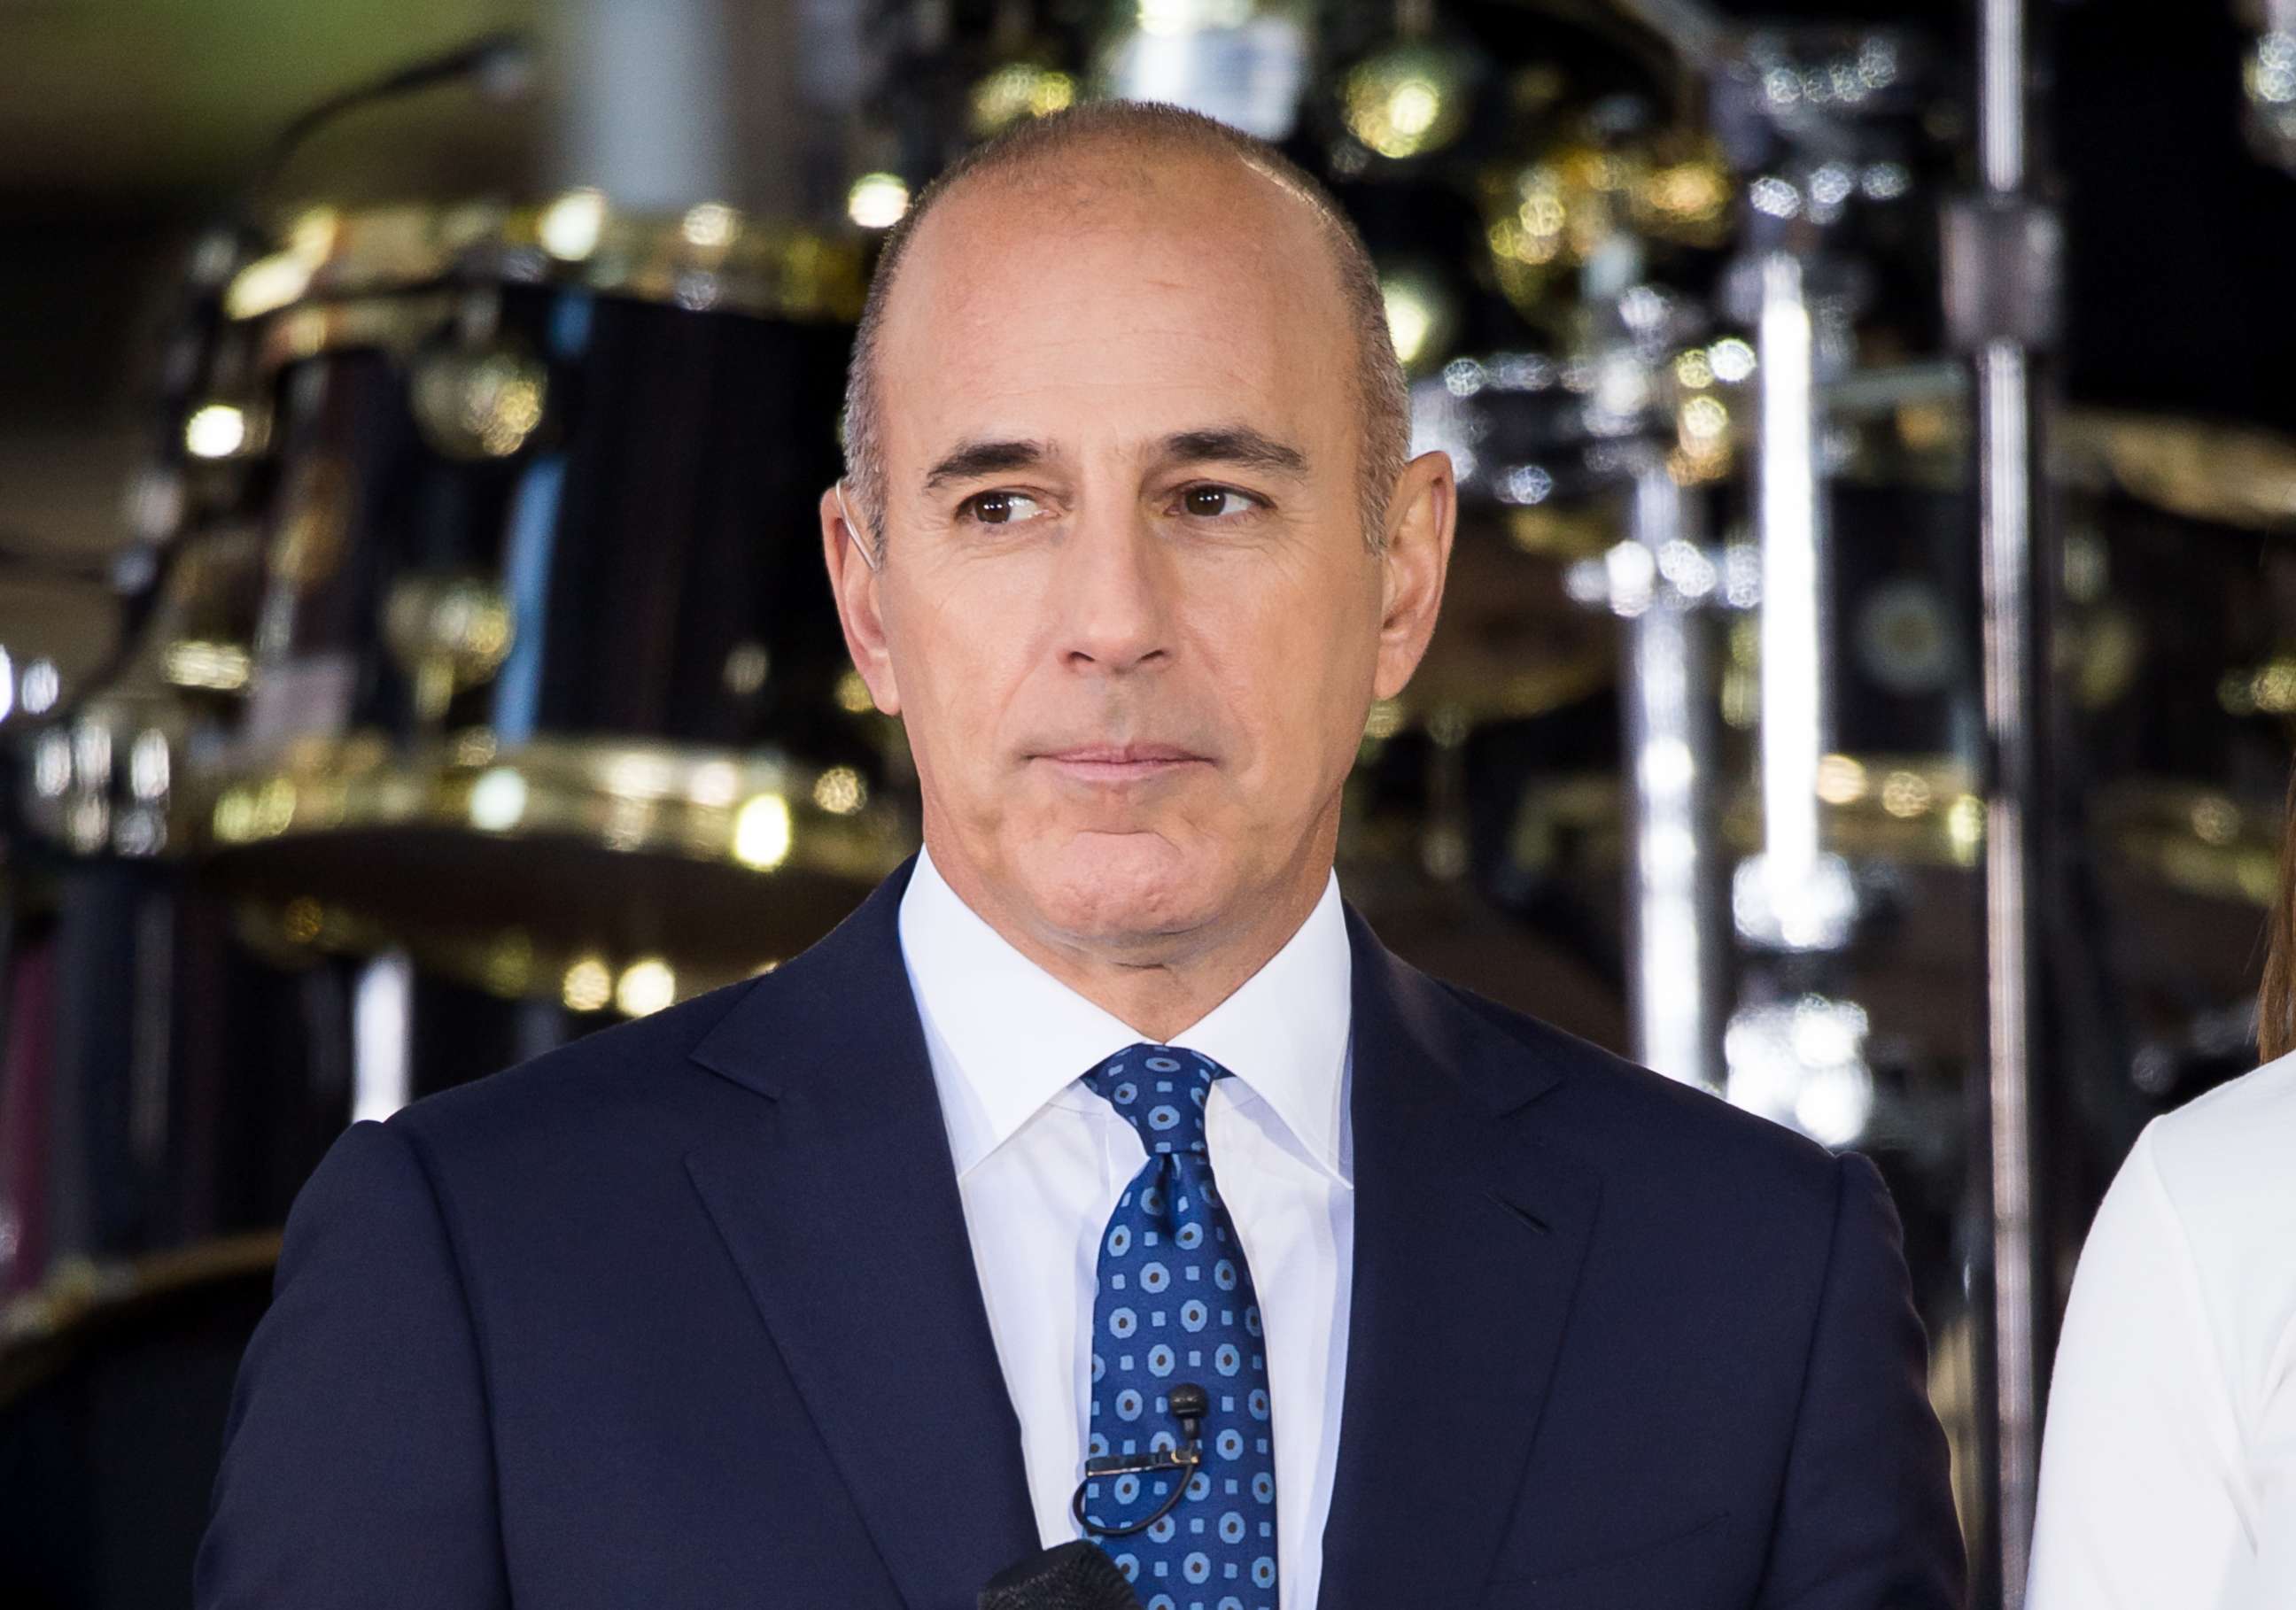 PHOTO: Matt Lauer attends NBC's "Today" at Rockefeller Plaza in this Sept. 29, 2017 file photo in New York City.